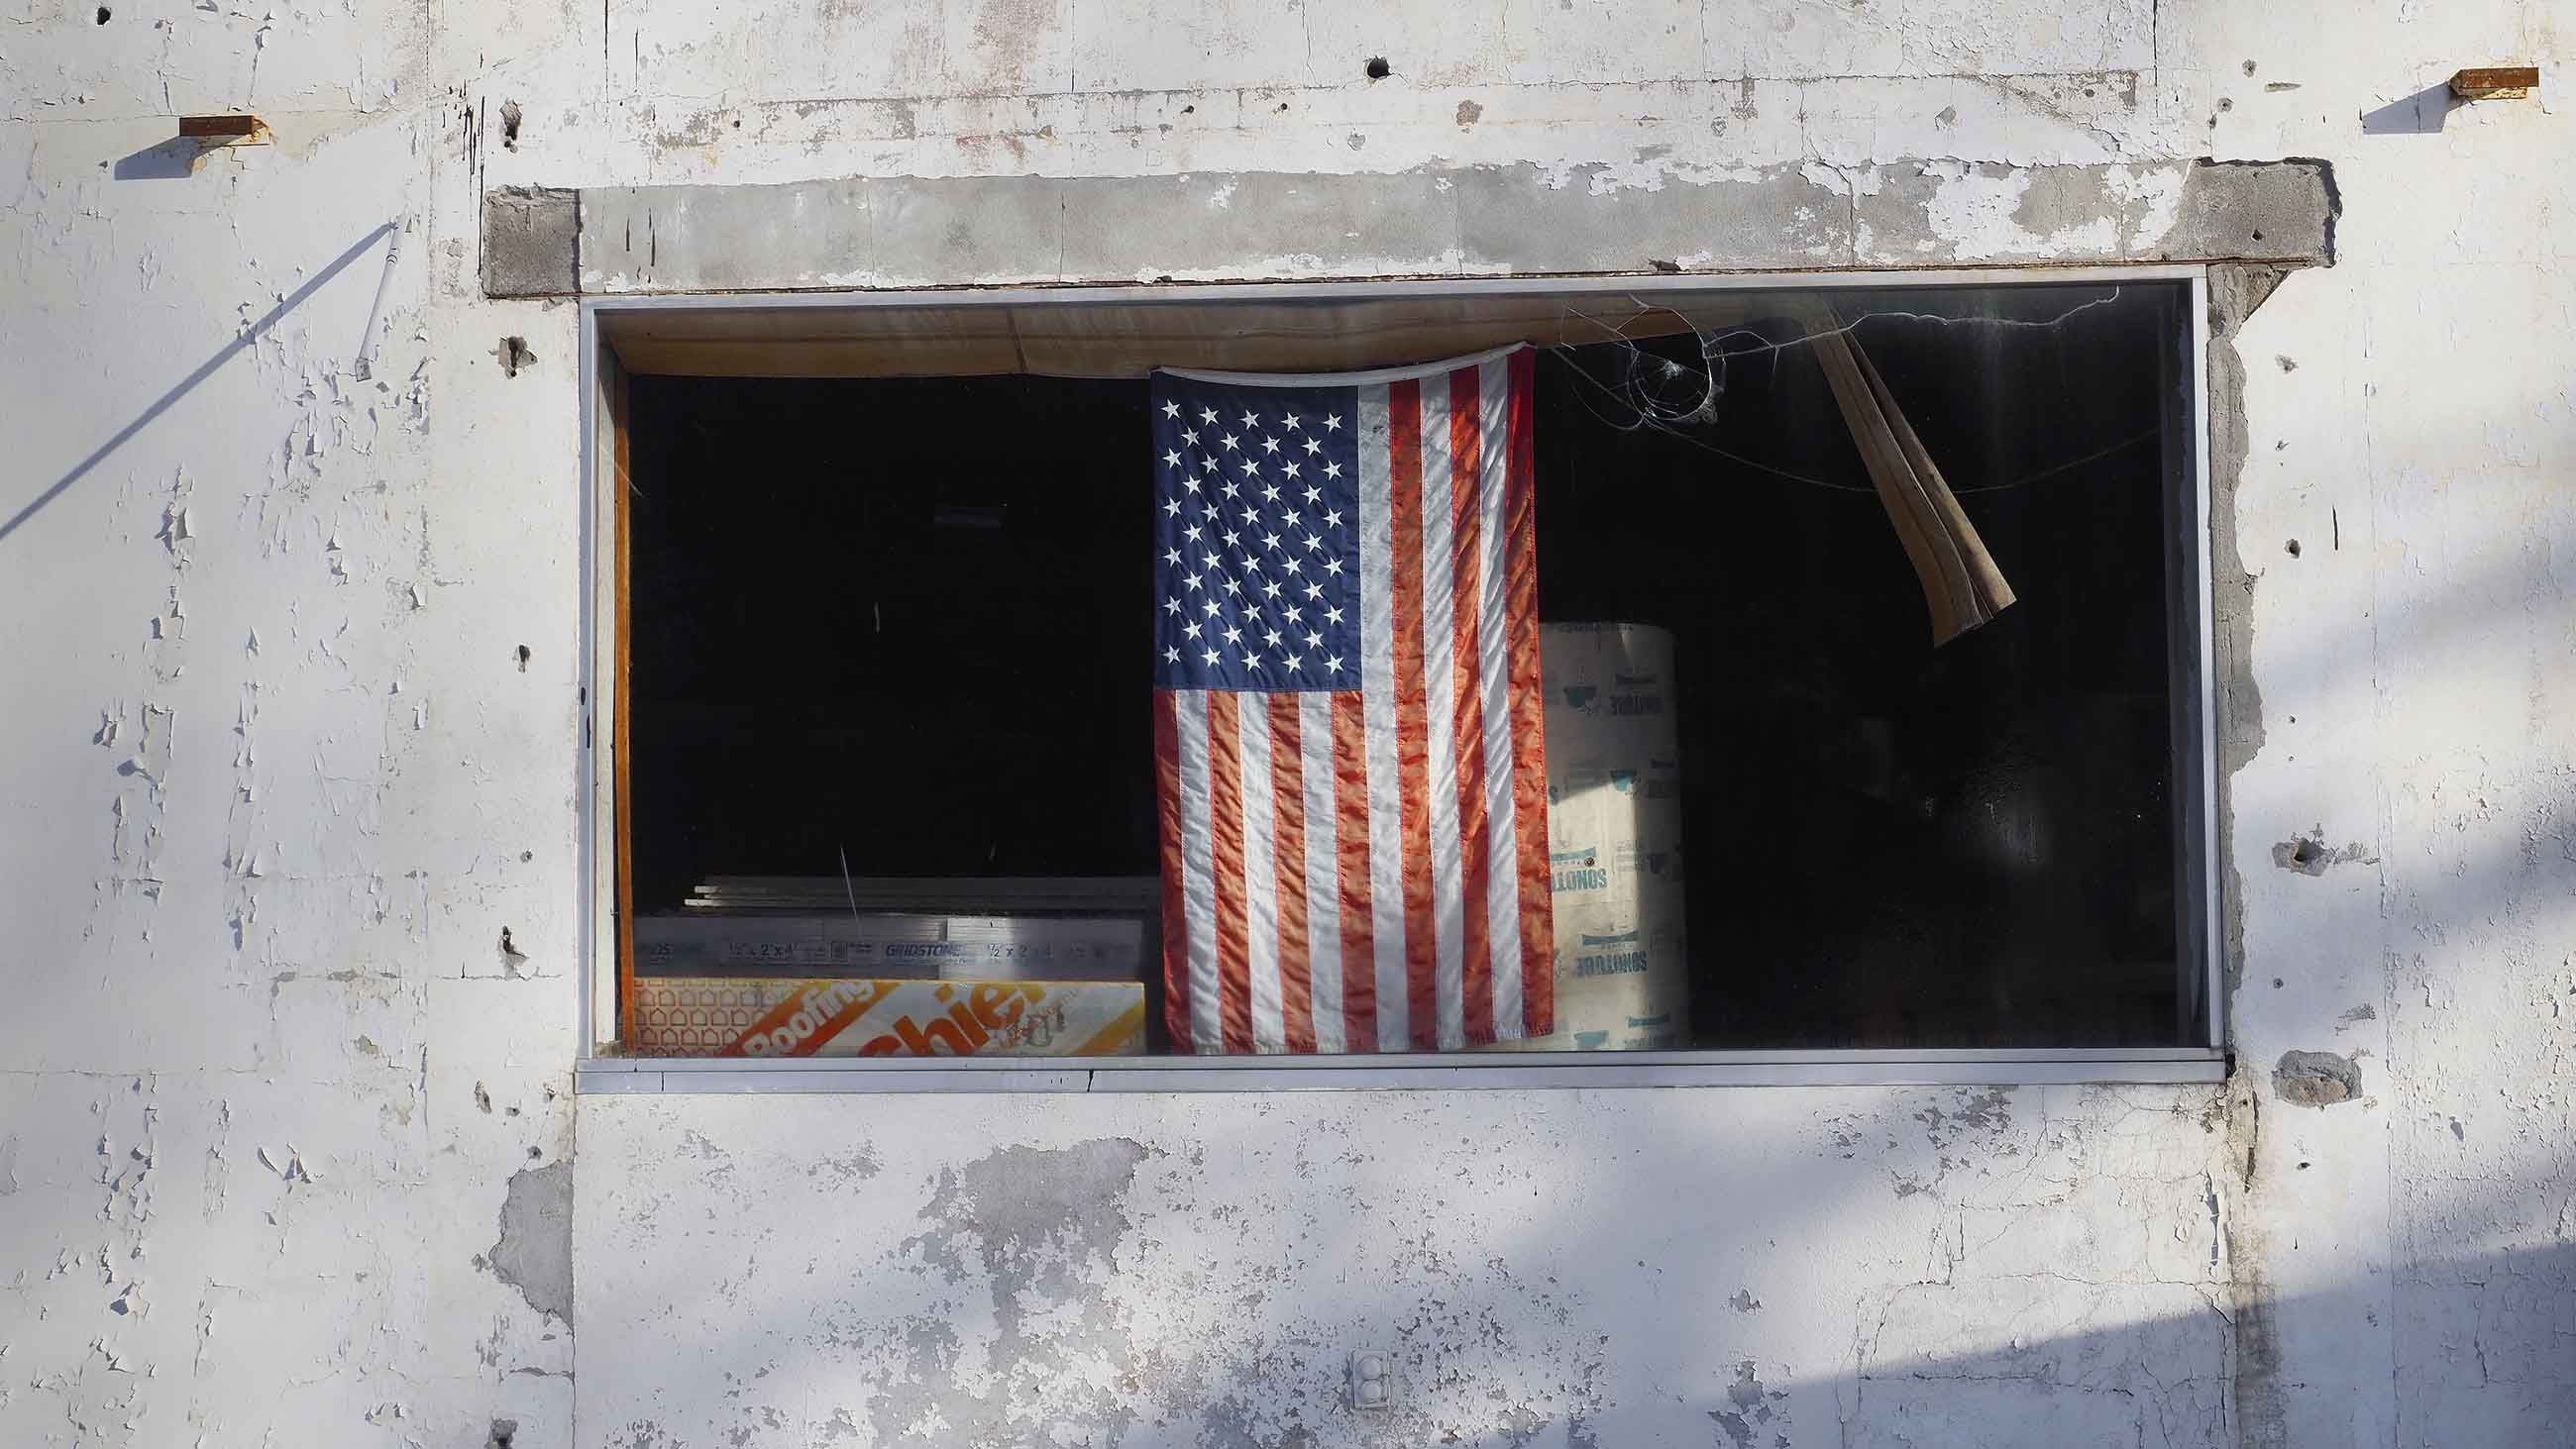 A flag hangs in the window of a small building on the grounds of the former Independent Leather Manufacturing Corporation in Gloversville, one of dozens of Superfund and brownfield sites in and around town. Image by Larry C. Price. United States, 2016.